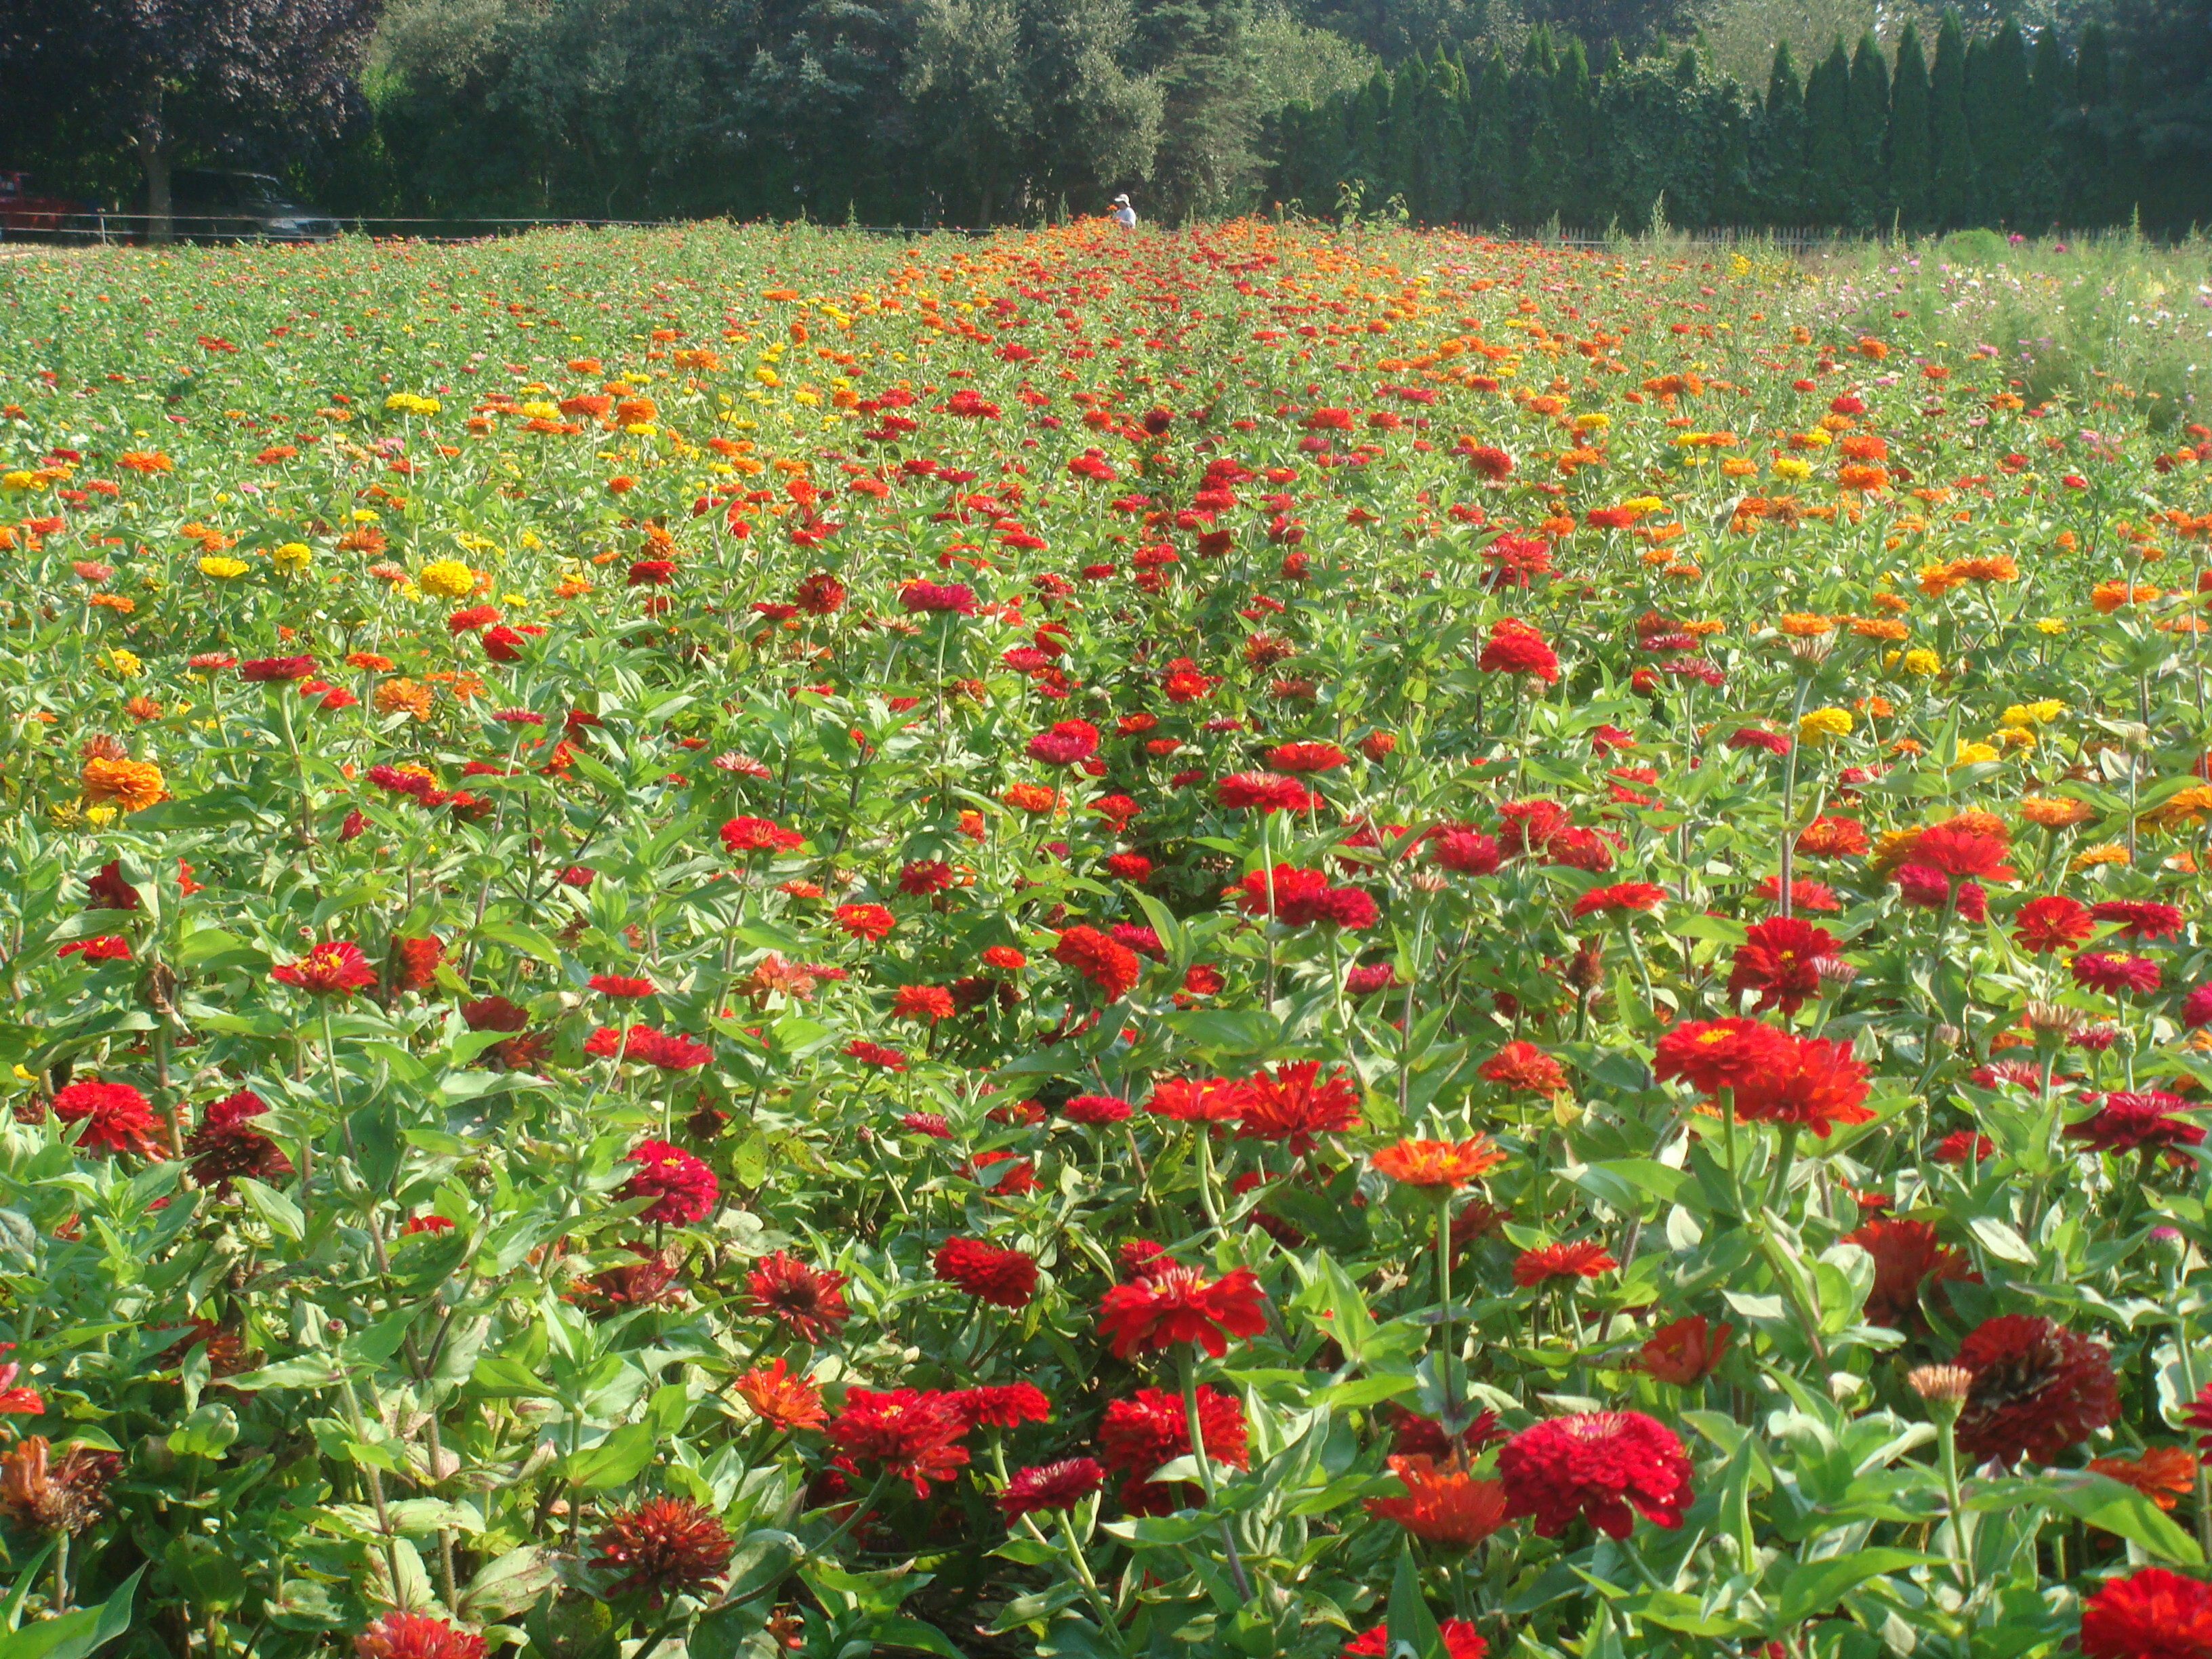 Flower Fields at Pike Farms